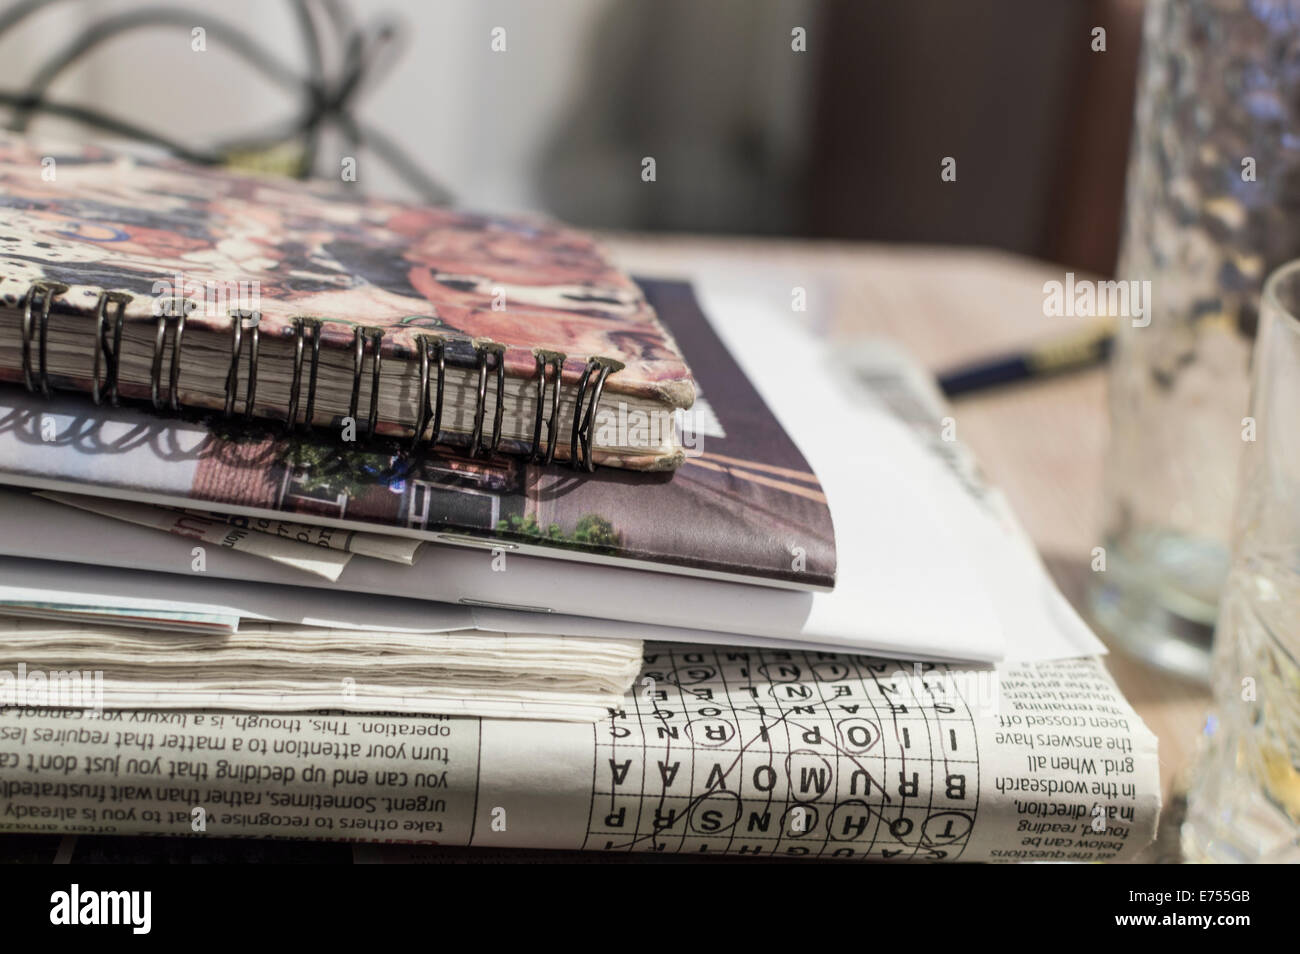 A stack of magazines, newspapers and books on a table next to drinking glasses. Completed crossword visible upside down. Stock Photo